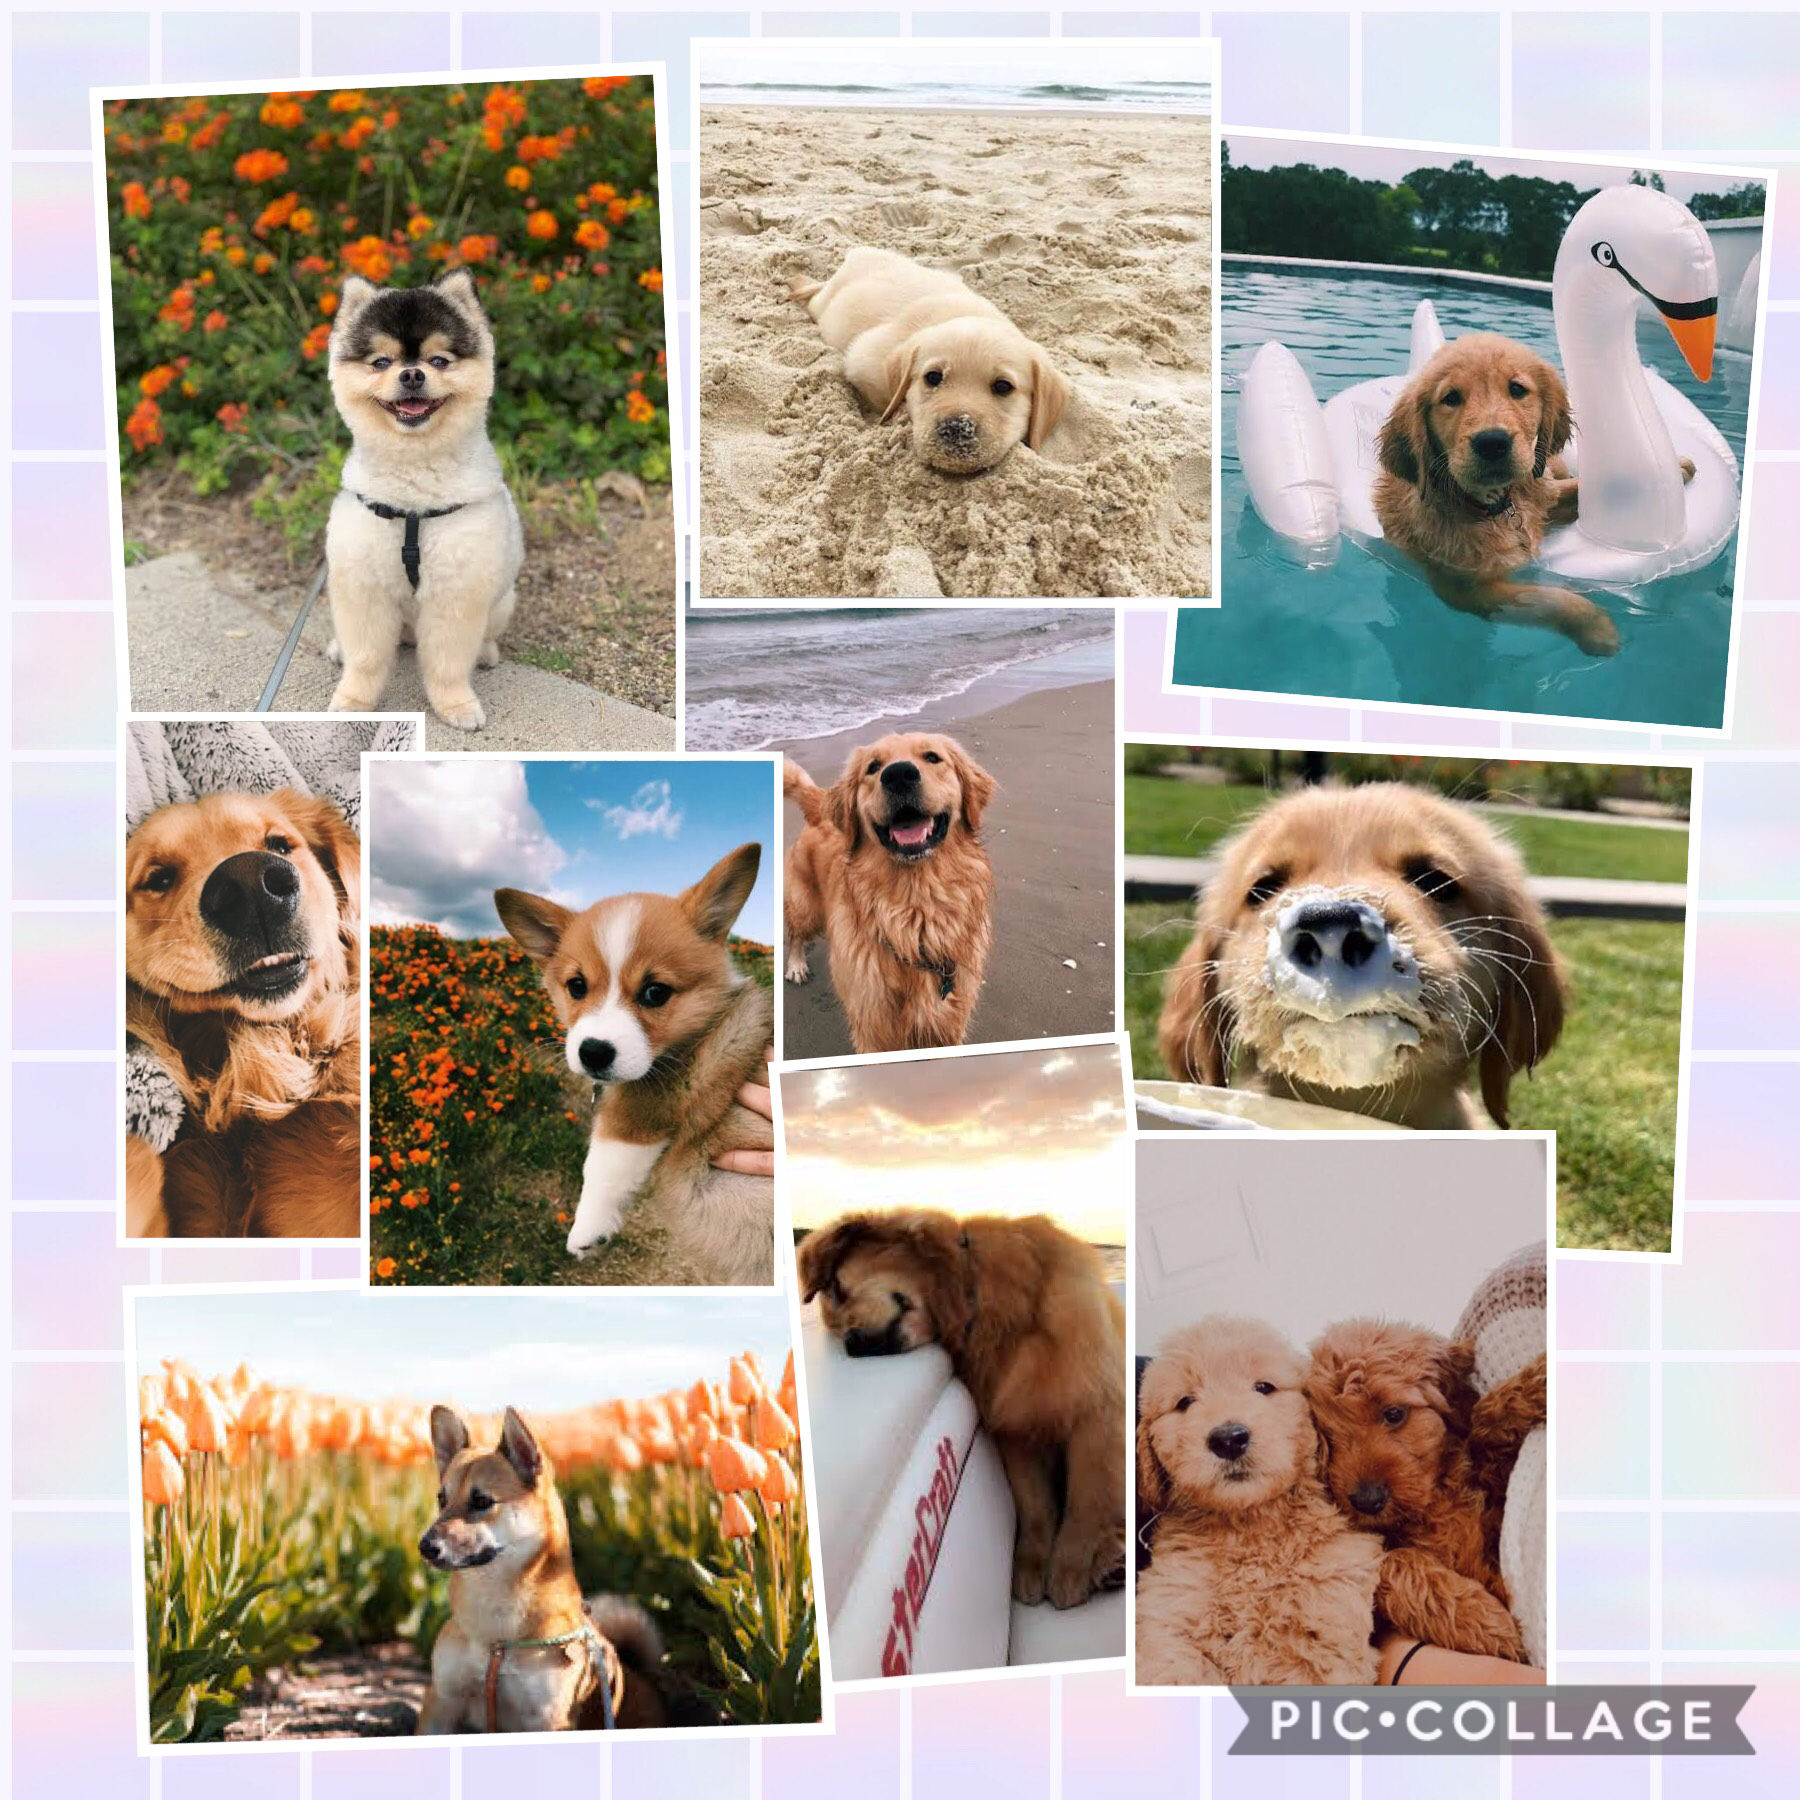 You guys I was just looking at dog images and I found these they are so so cute so I guess you guys know what my favourite animal is (hint🐶) (hint2 woof) 